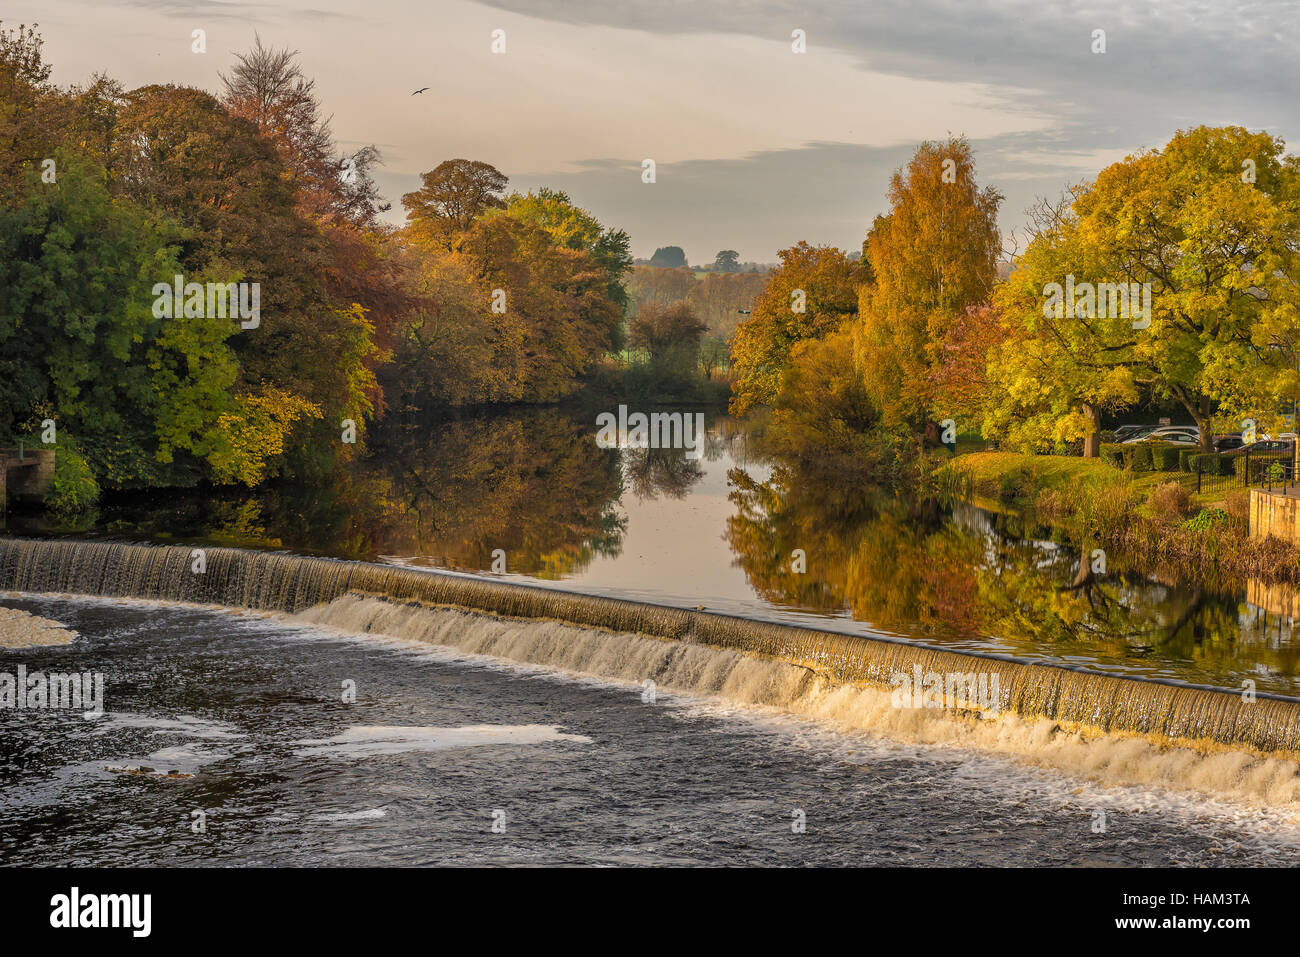 L'autunno. Il fiume Wharfe a Wetherby. Foto Stock